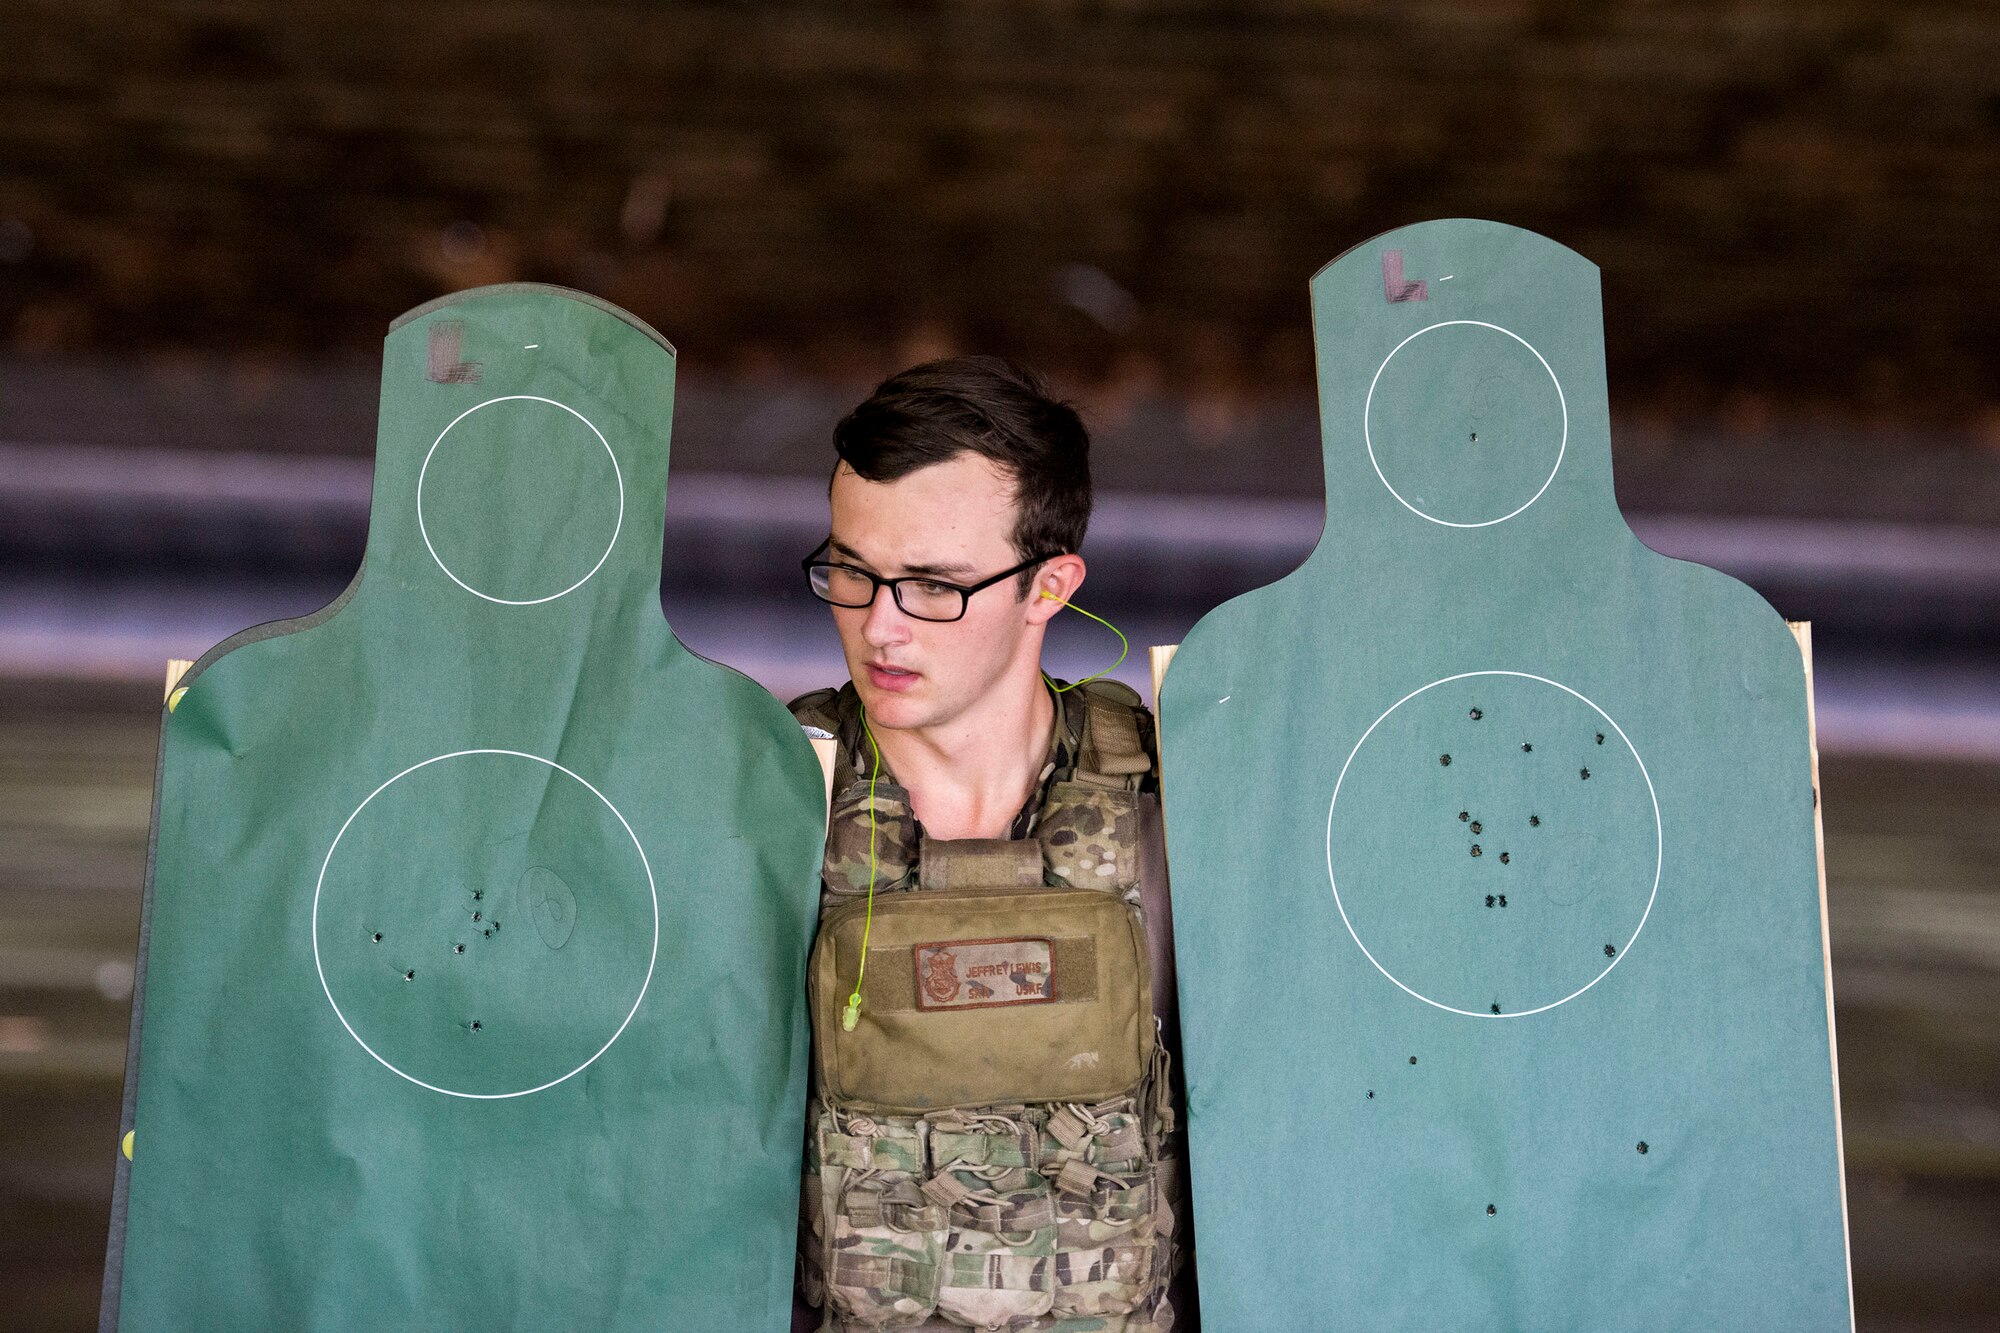 Senior Airman Jeffrey Lewis, 822d Base Defense Squadron fireteam leader, carries targets back after the shooting competition portion of the Defender Challenger assessment, July 30, 2018, at Moody Air Force Base, Ga.  Seven Moody defenders trudged through a gauntlet that tested their capability, lethality and readiness. Ultimately, only Lewis had the scores, determination and perseverance to advance to the next level for a chance to represent Air Combat Command during the 2018 Defender Challenge, Sept. 8-14, at Joint Base San Antonio-Camp Bullis, Texas. (U.S. Air Force photo by Airman 1st Class Erick Requadt)